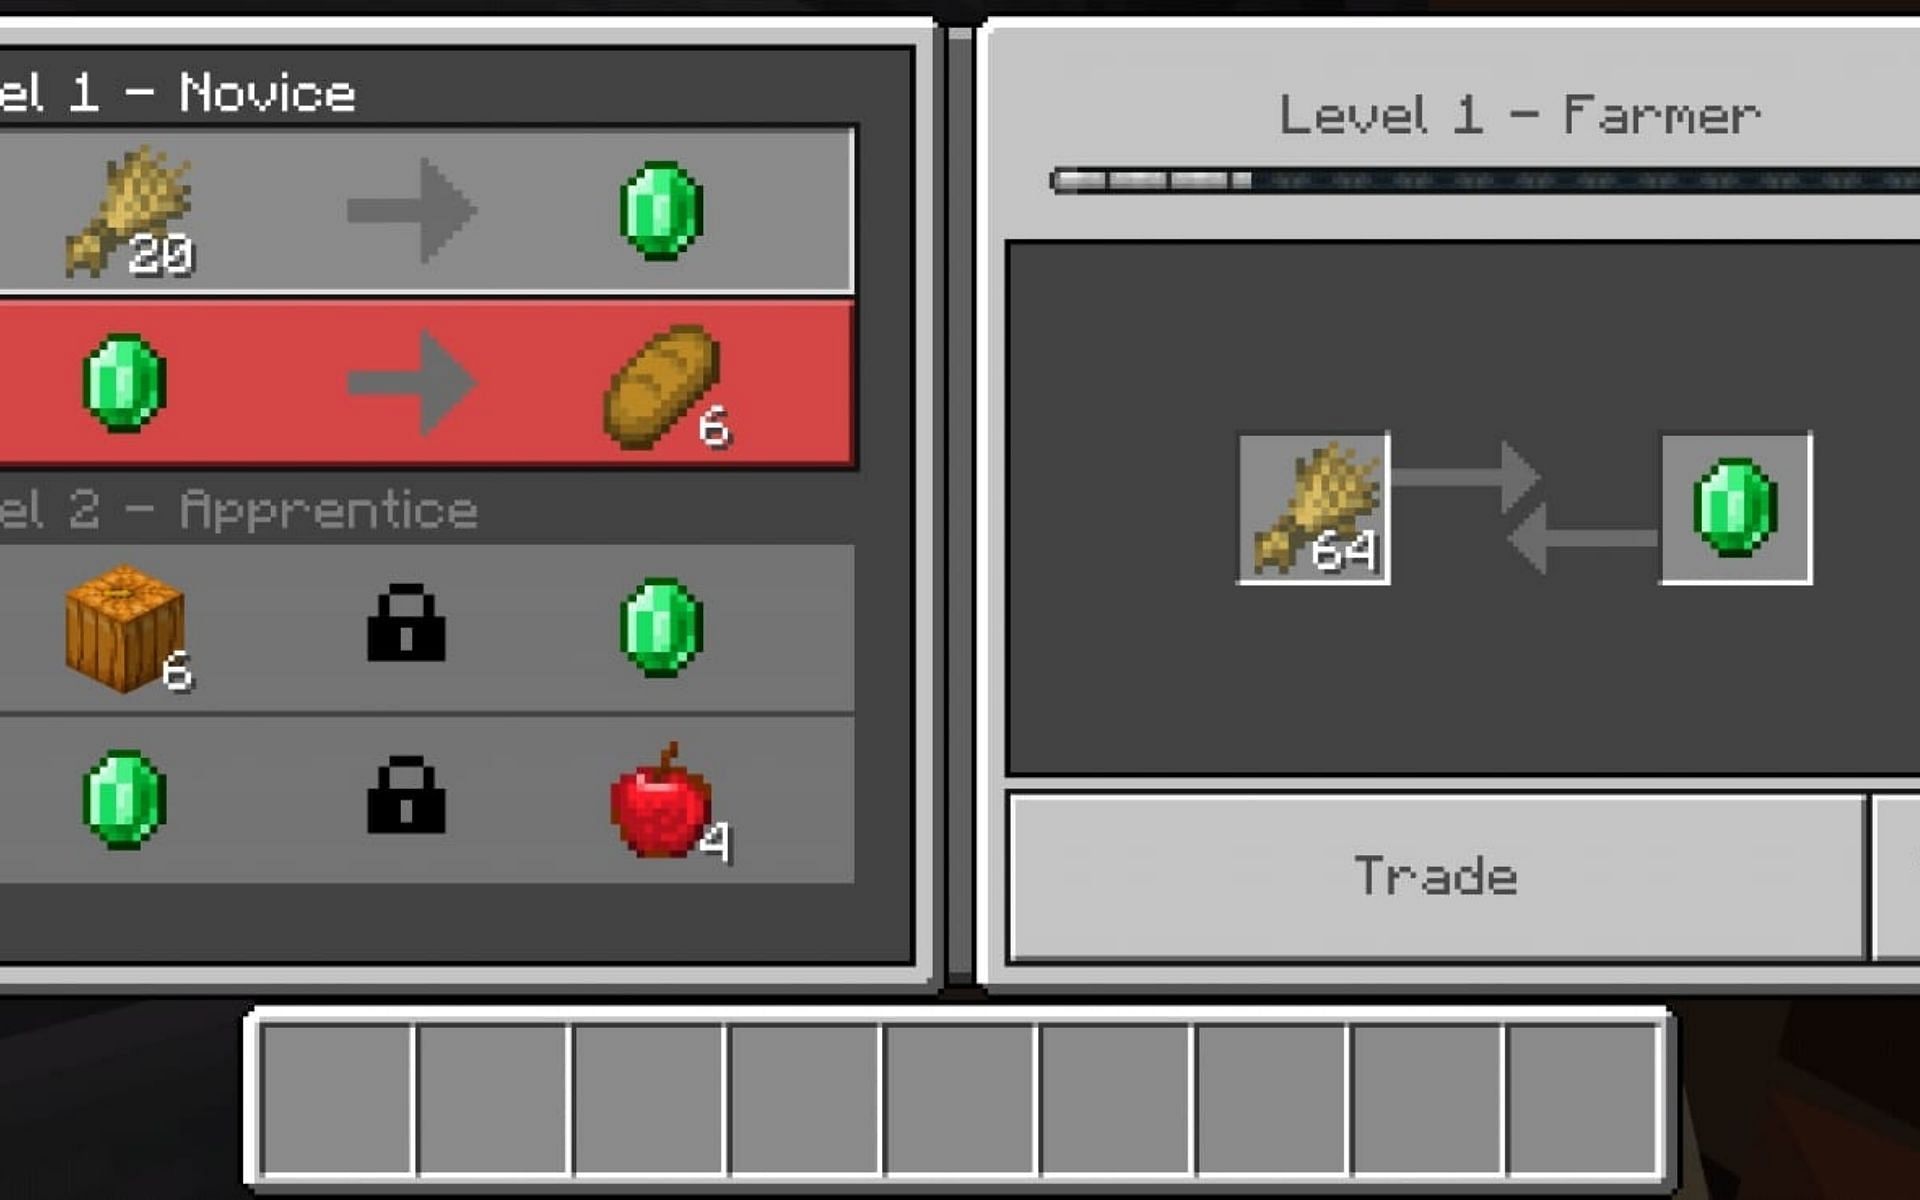 Trade offered by Farmer (Image via Minecraft)